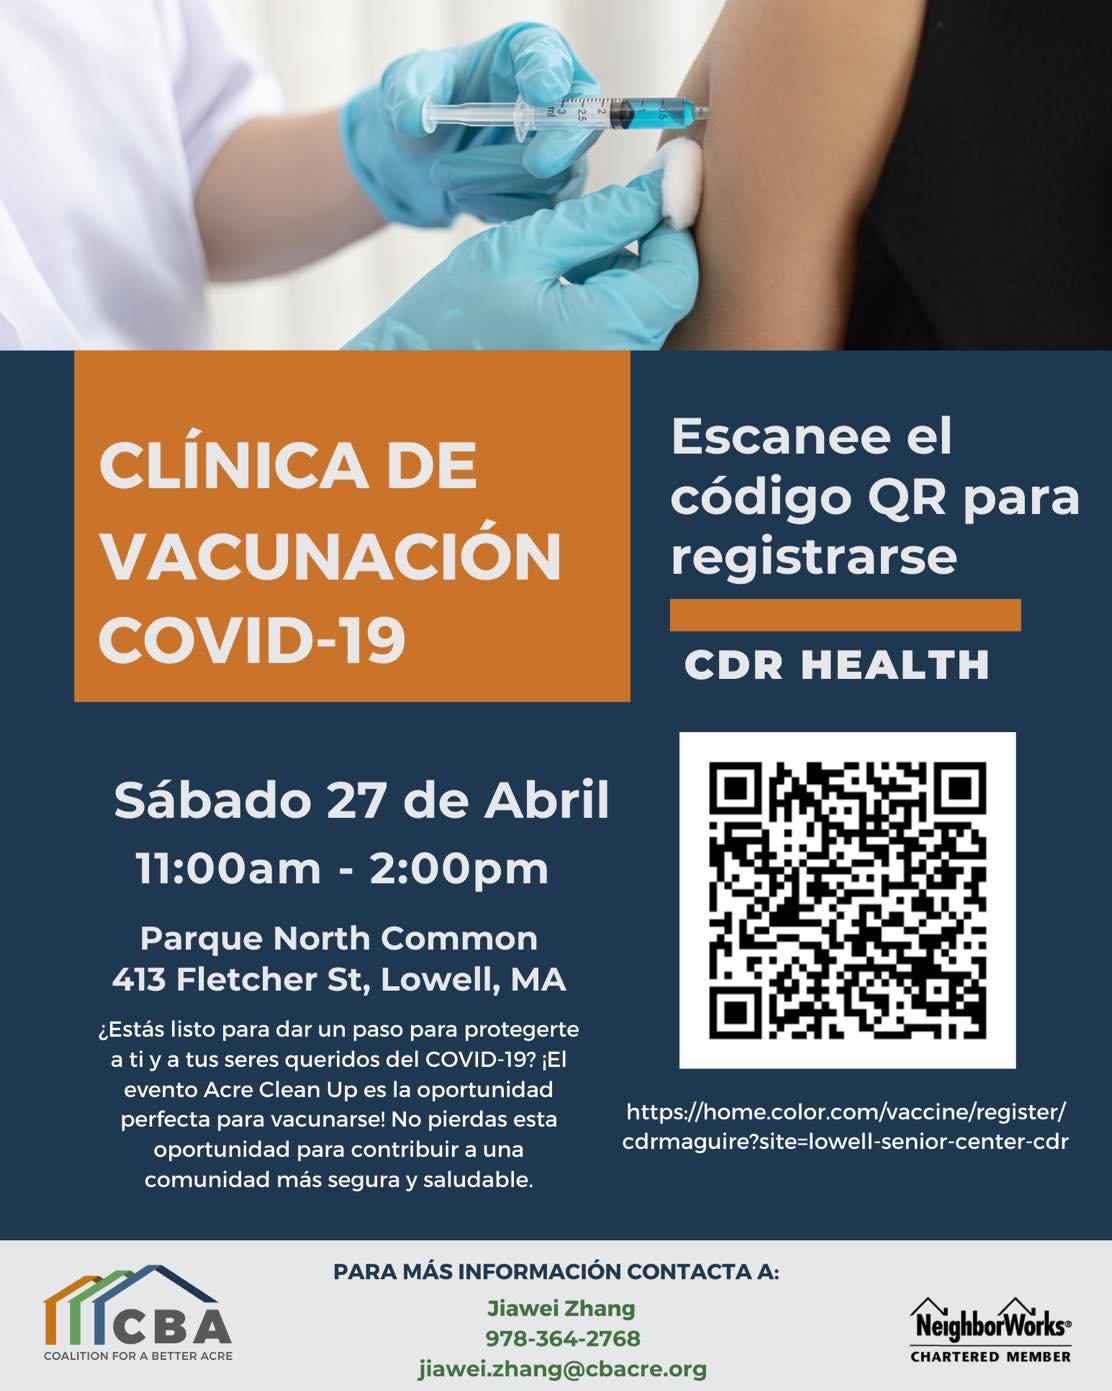 Are you ready to take a step towards protecting yourself and your loved ones from COVID-19? 

The Acre Clean Up event is the perfect opportunity to get vaccinated! 

Don't miss out on this chance to make a difference and contribute towards a safer an